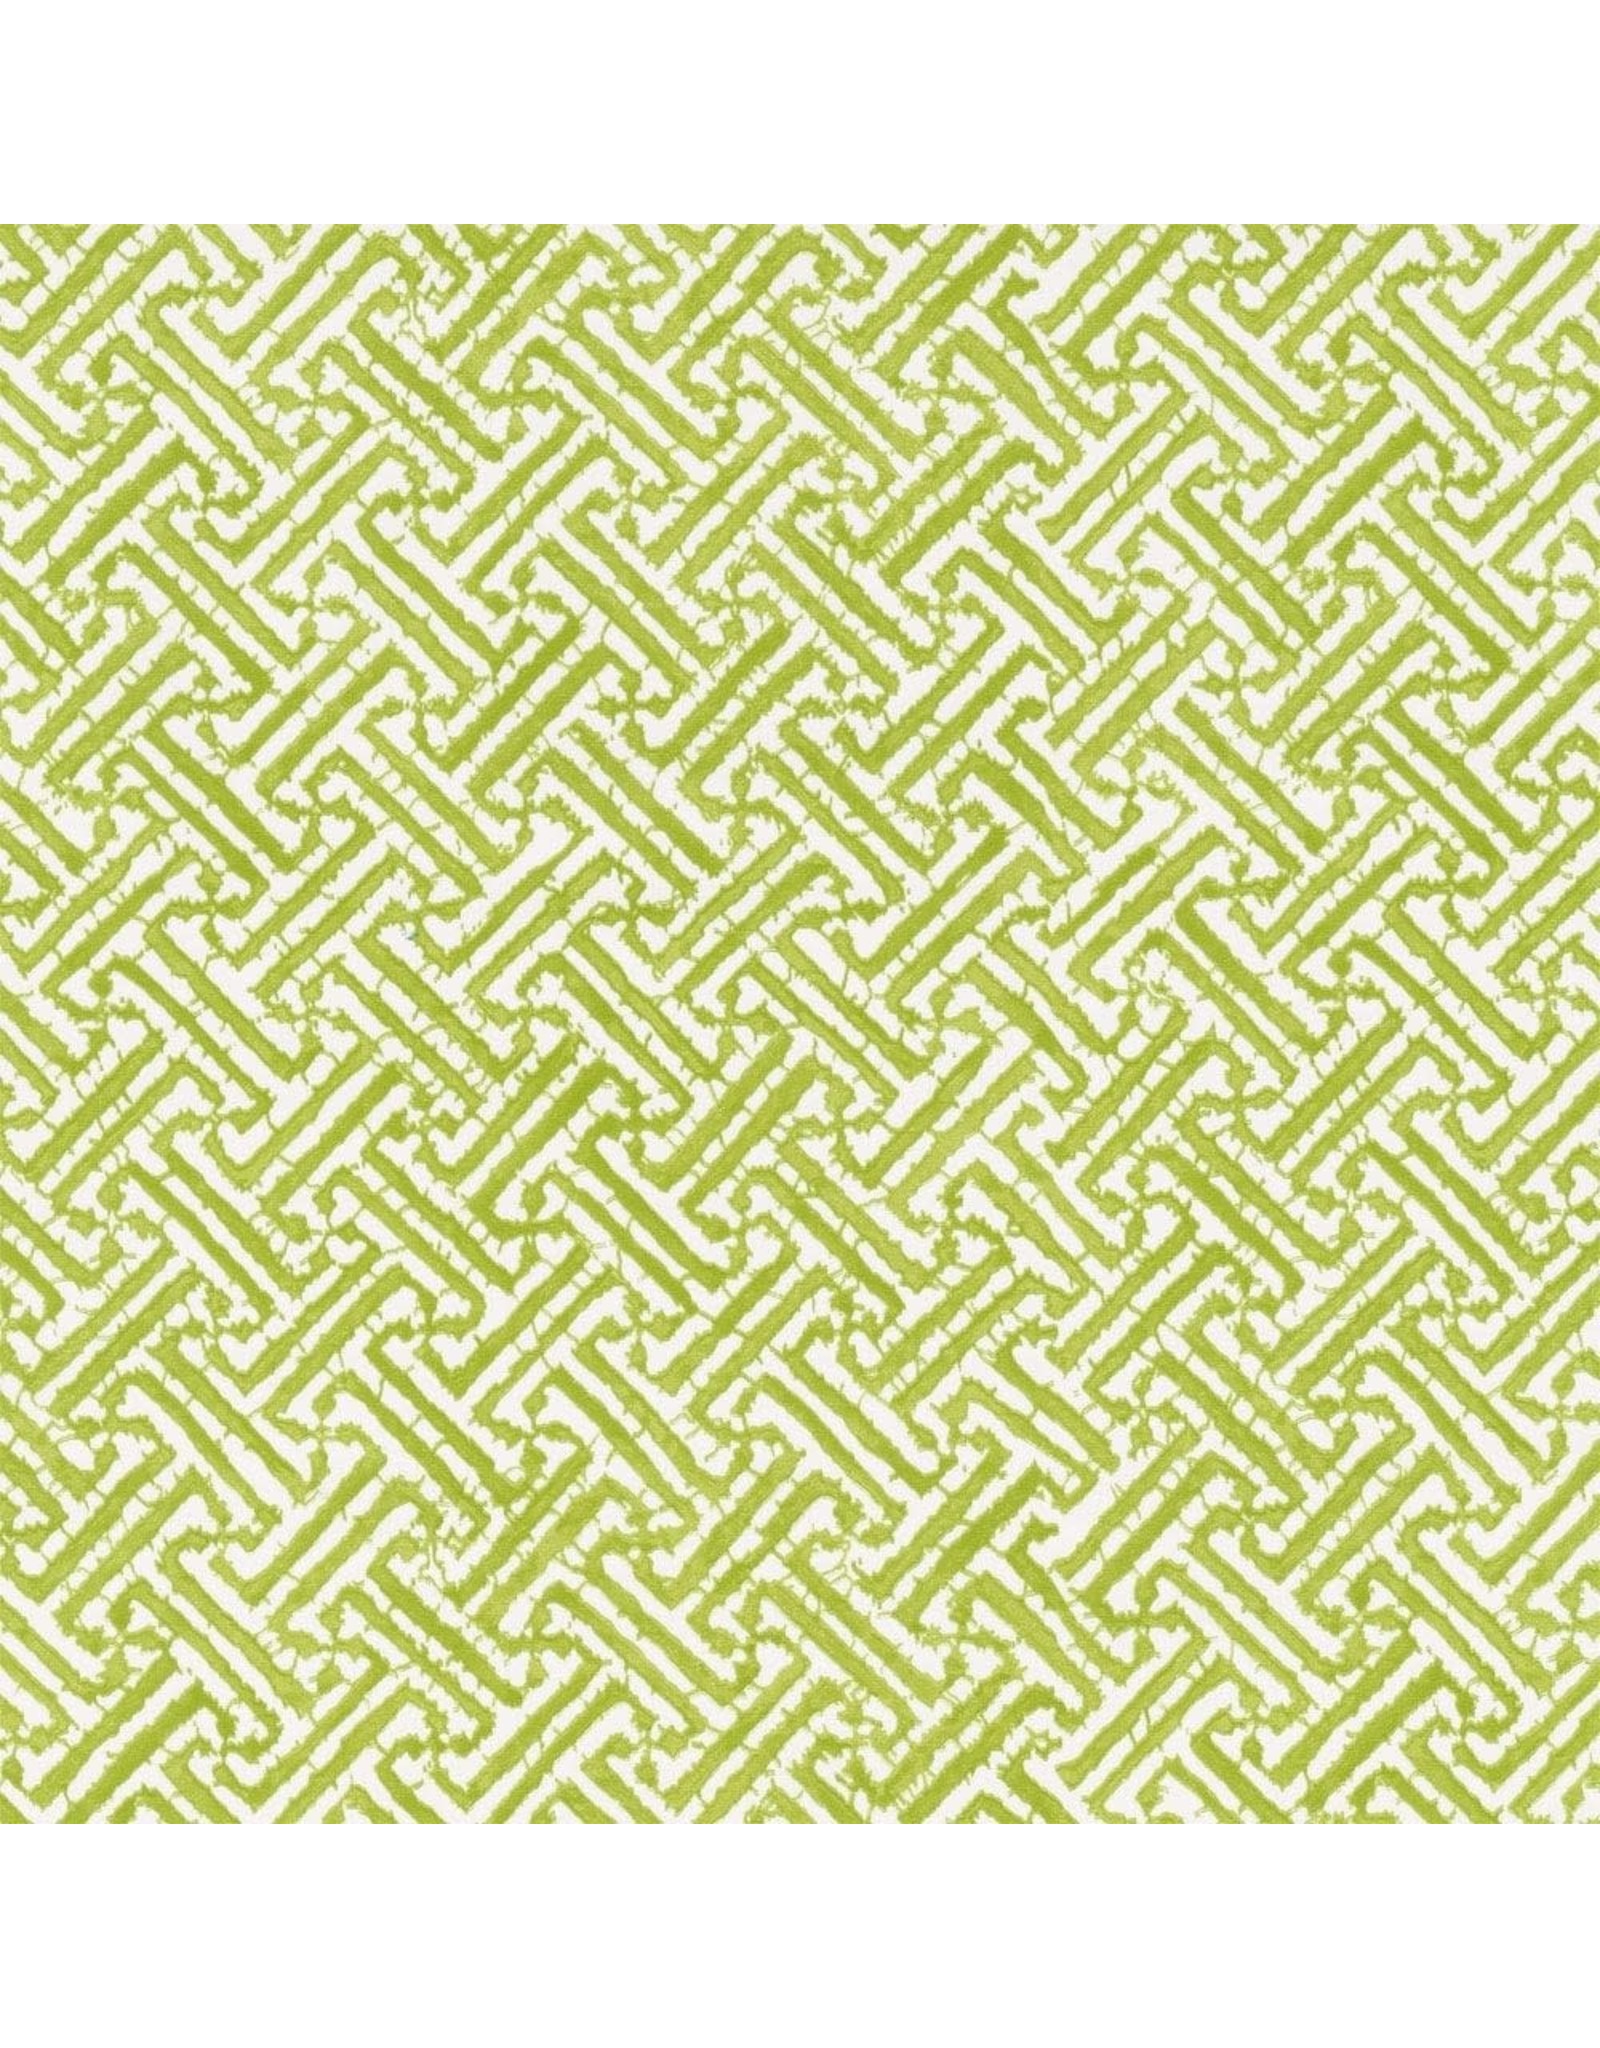 Caspari Gift Wrapping Paper 5ft Roll Fretwork Green